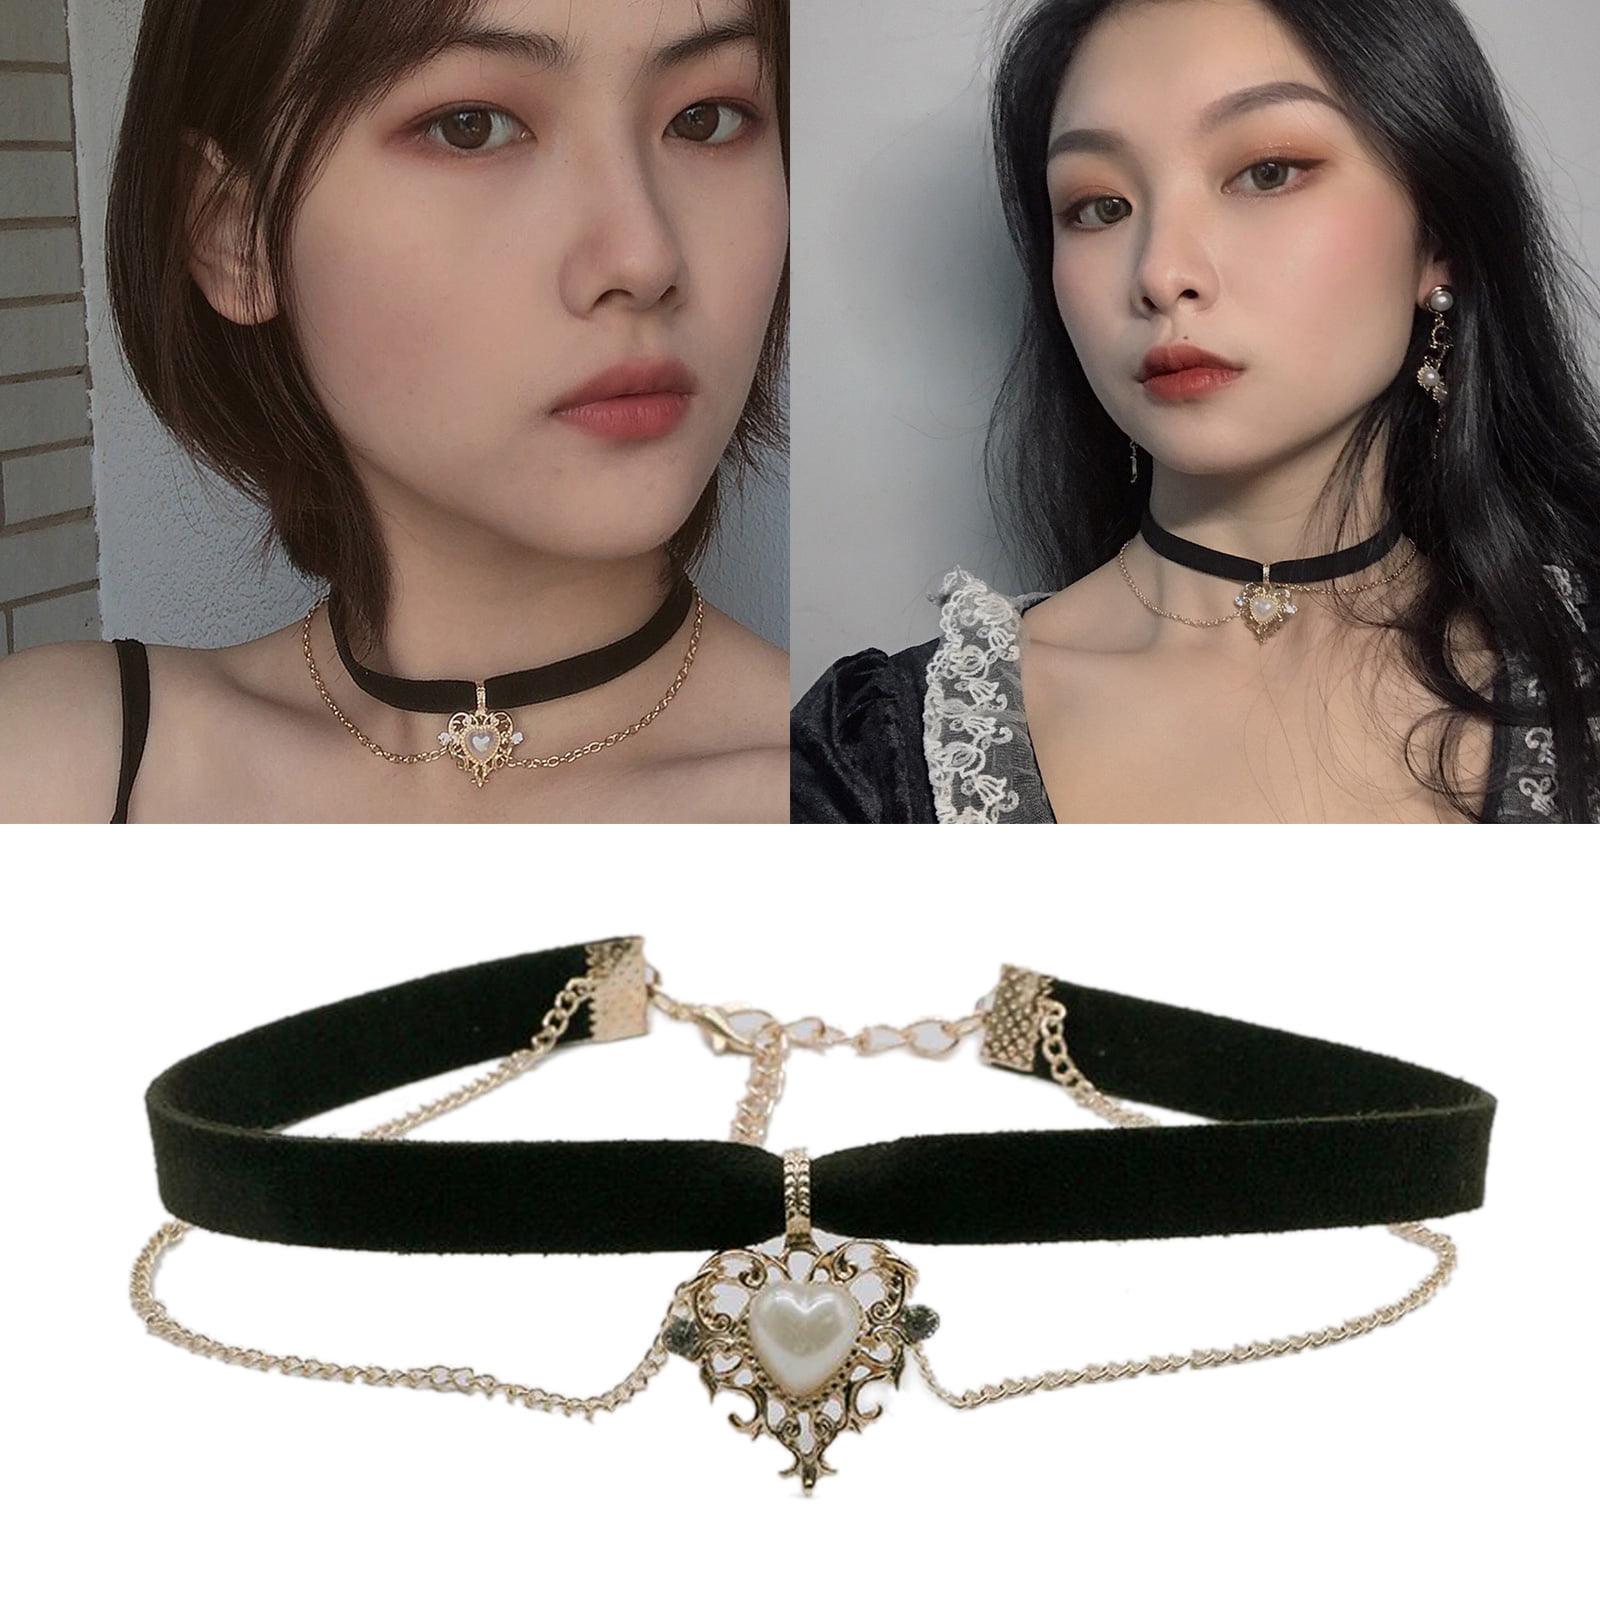 Buy iWenSheng Halloween Costumes Jewelry for Women - Steam-punk Black Lace Choker  Necklace Gothic Jewelry Accessories, Vampire Choker Necklace Costume for  Teen Girls (1#) at Amazon.in